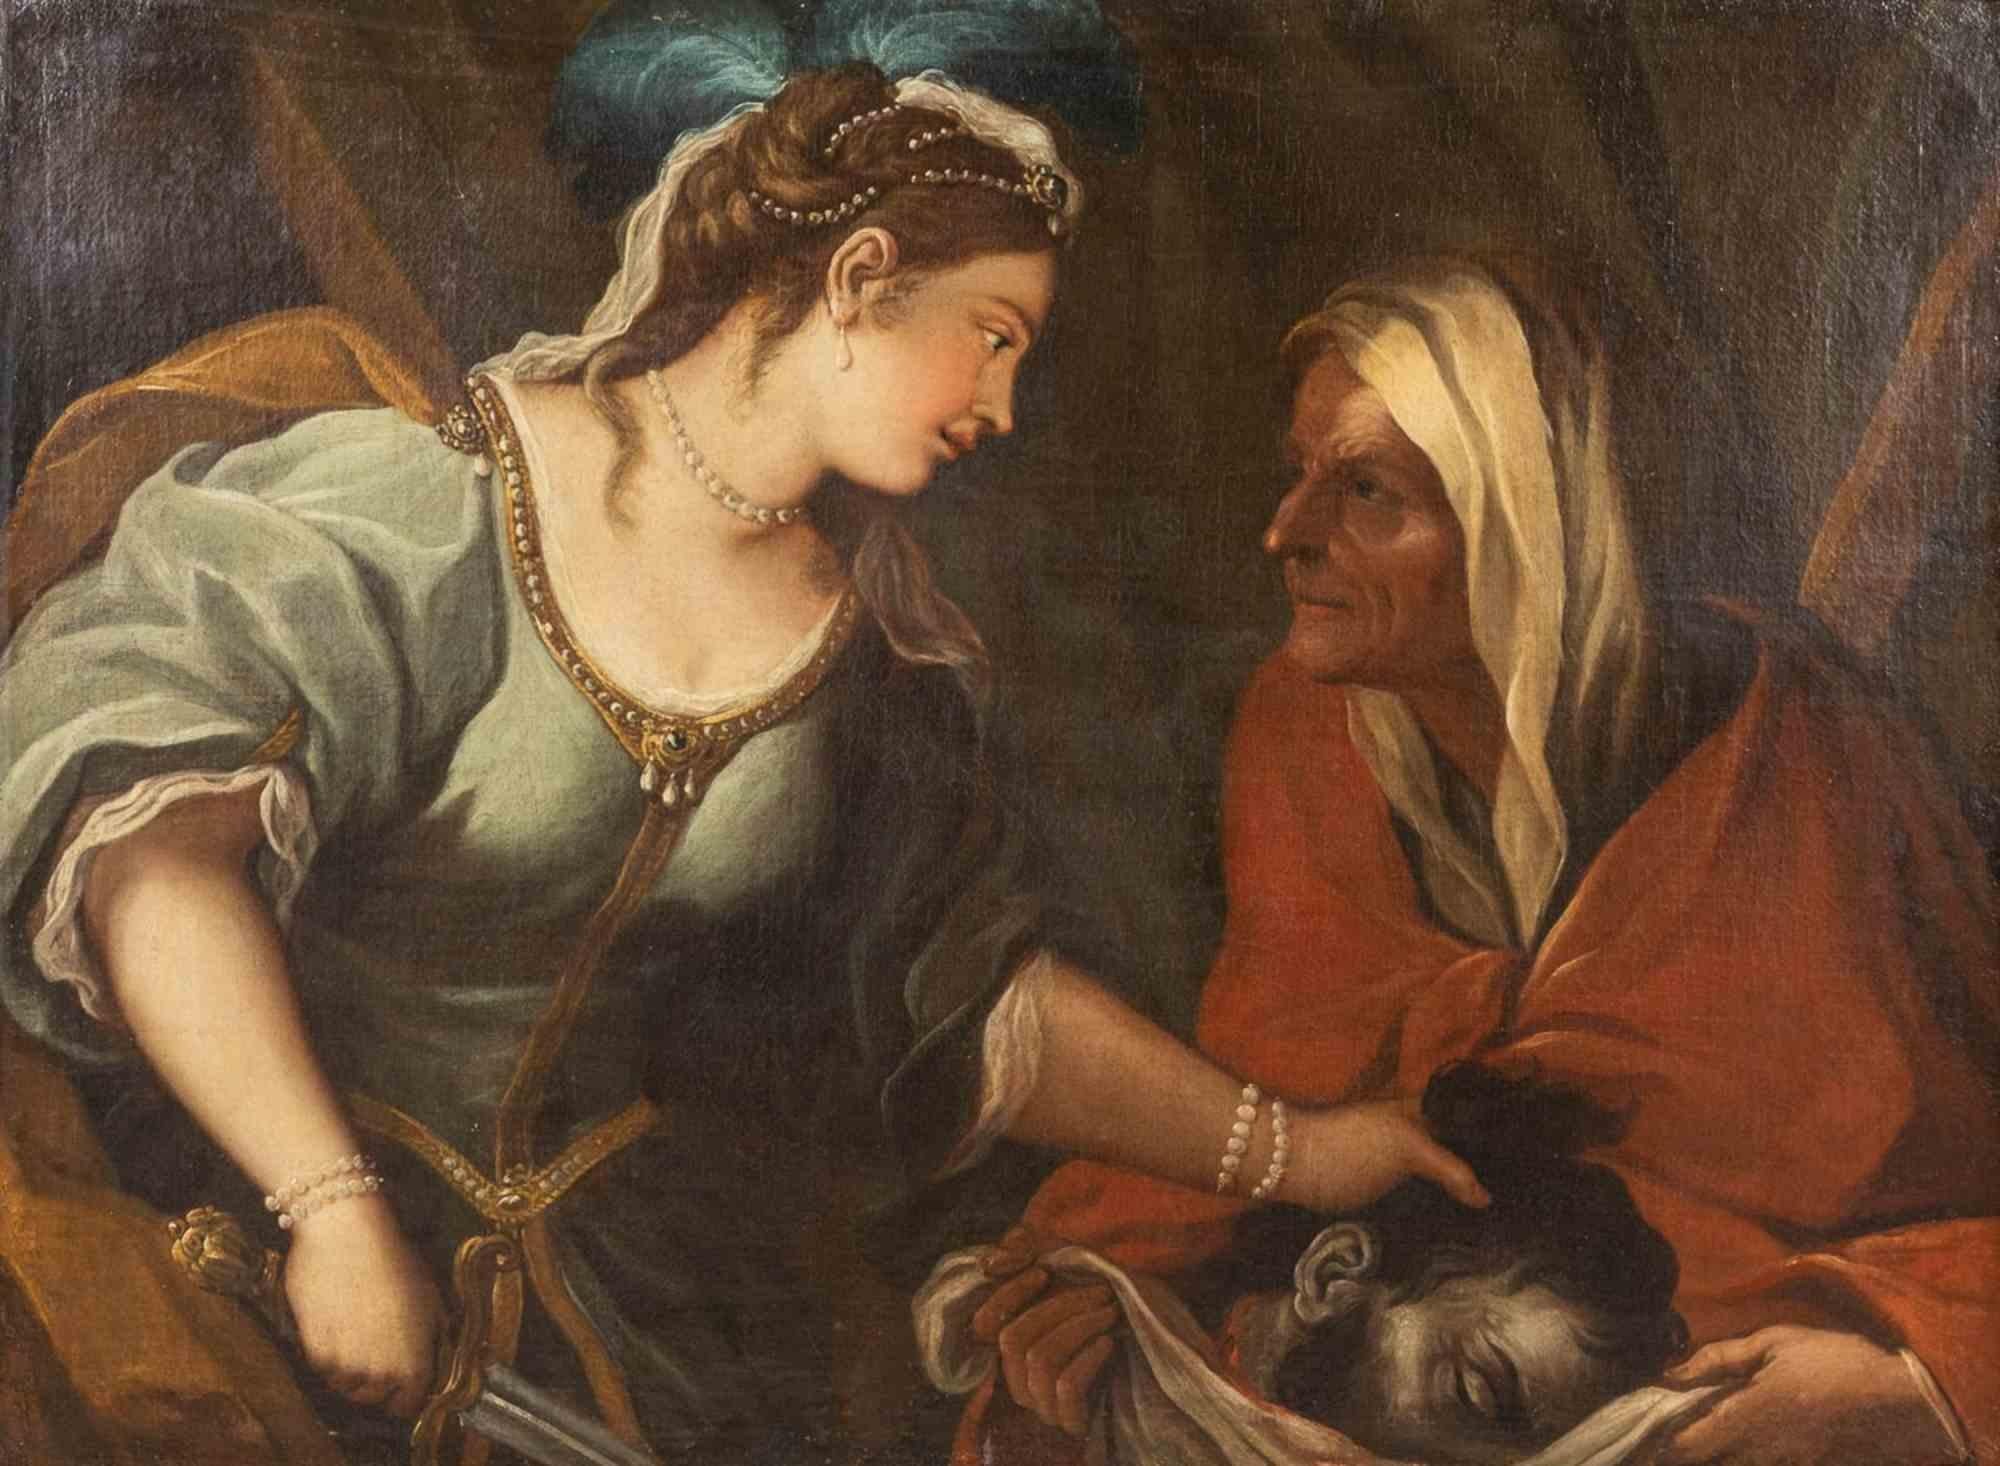 Judith Beheading Holoferne - Oil painting by G.R. Badaracco - Late 17th Century